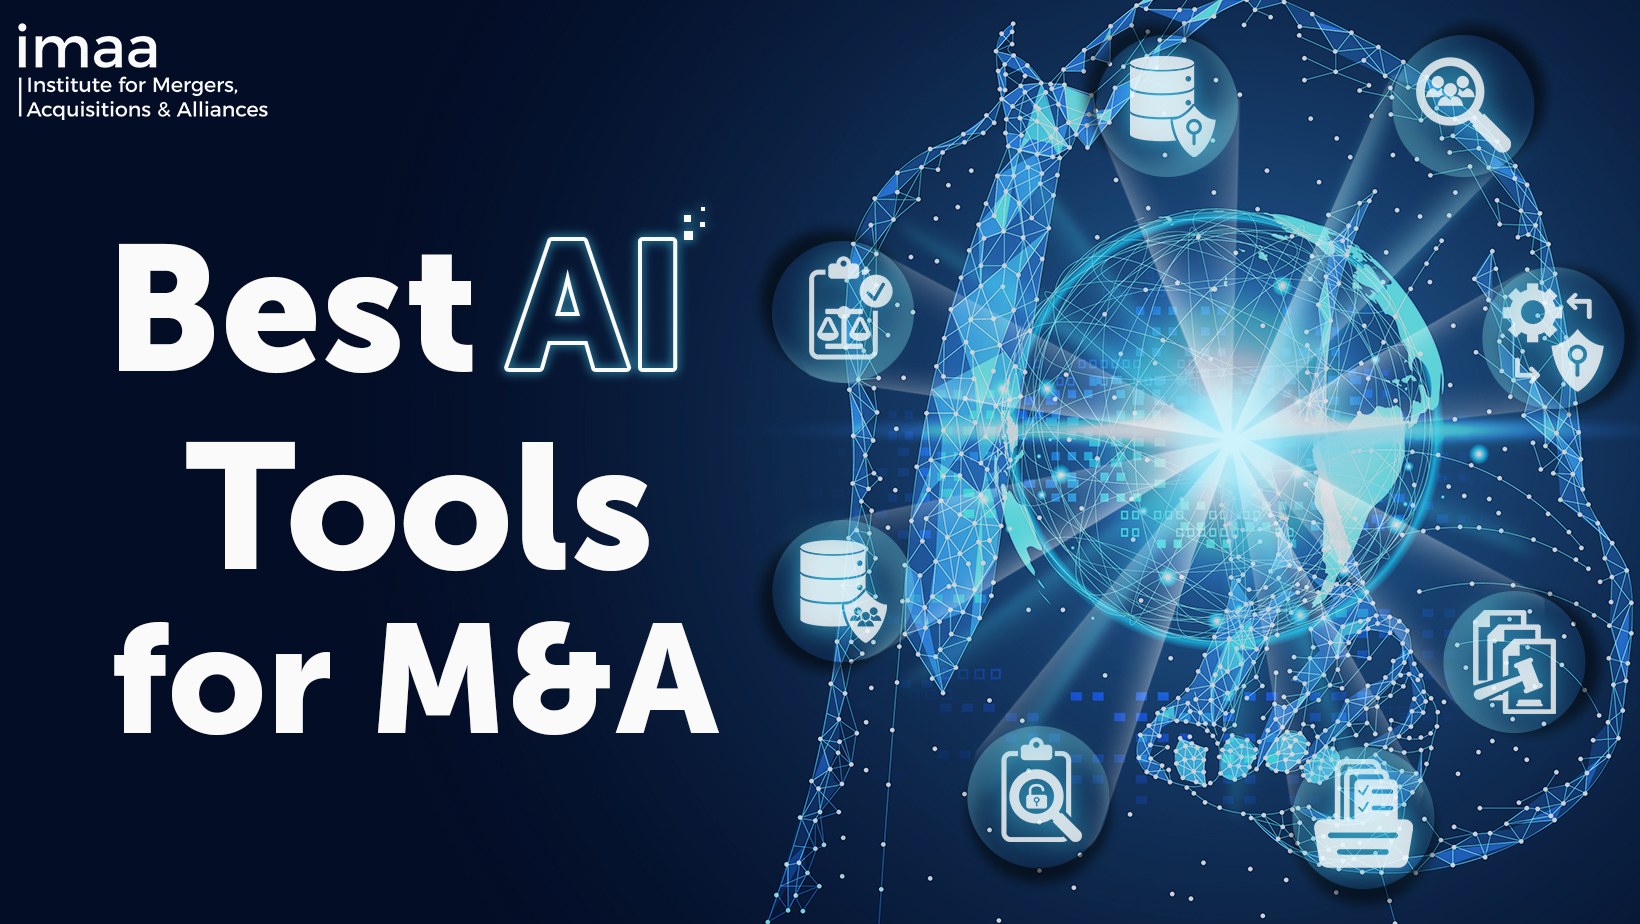 Best AI Tools for M&A